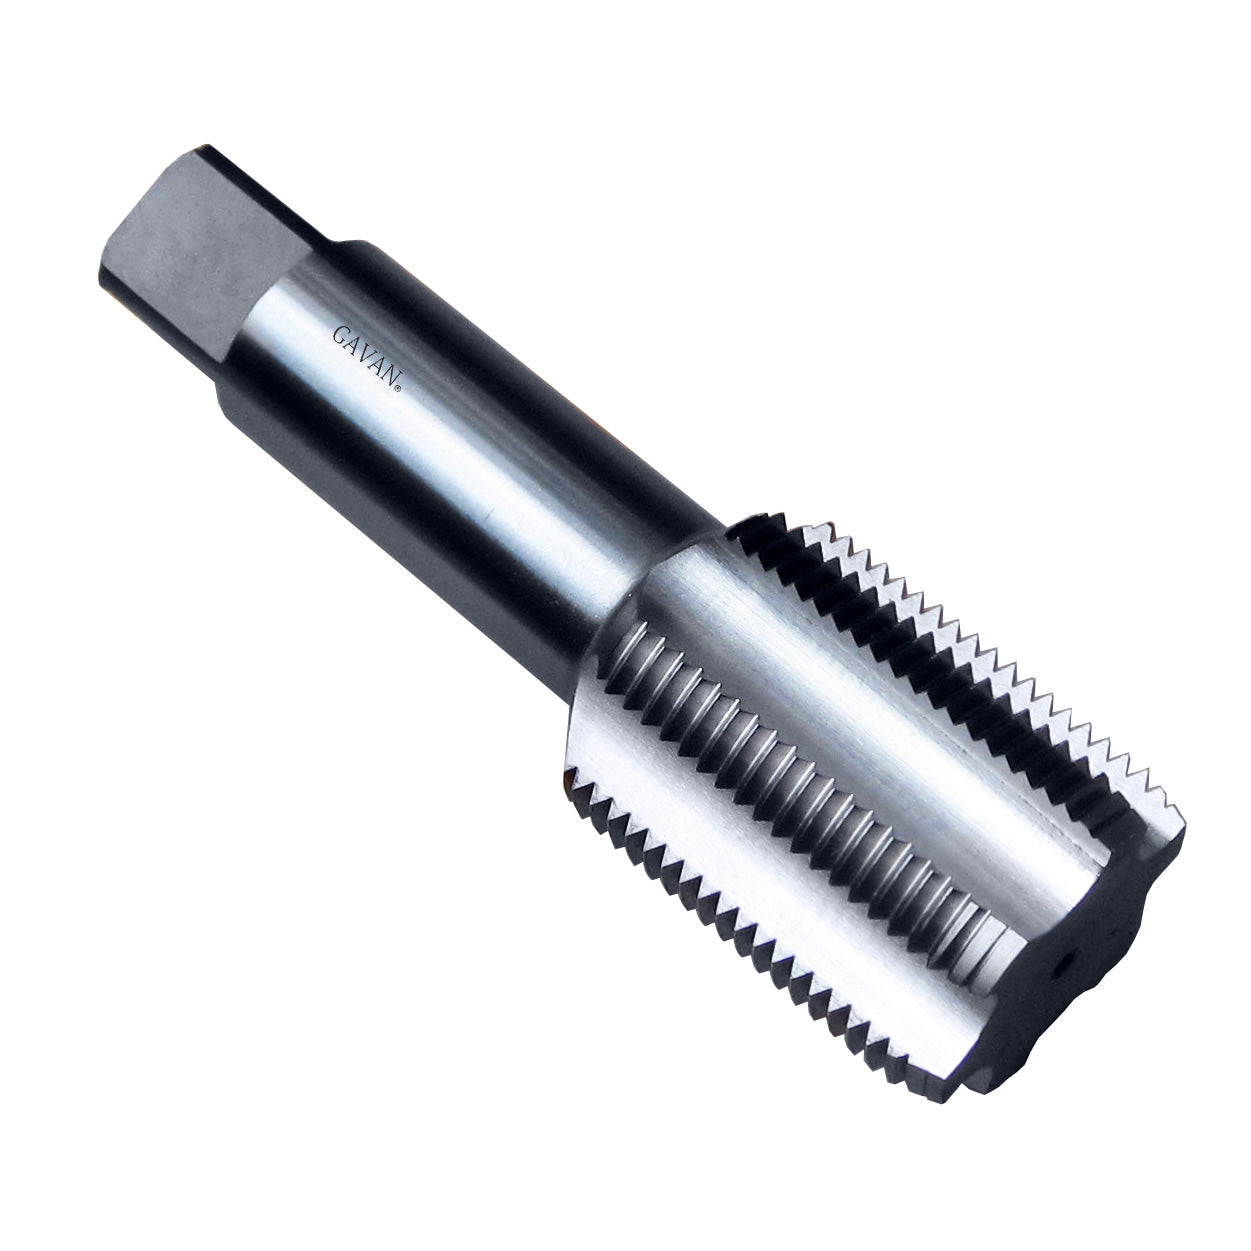 1 7/8" - 20 HSS Unified Right Hand Thread Tap